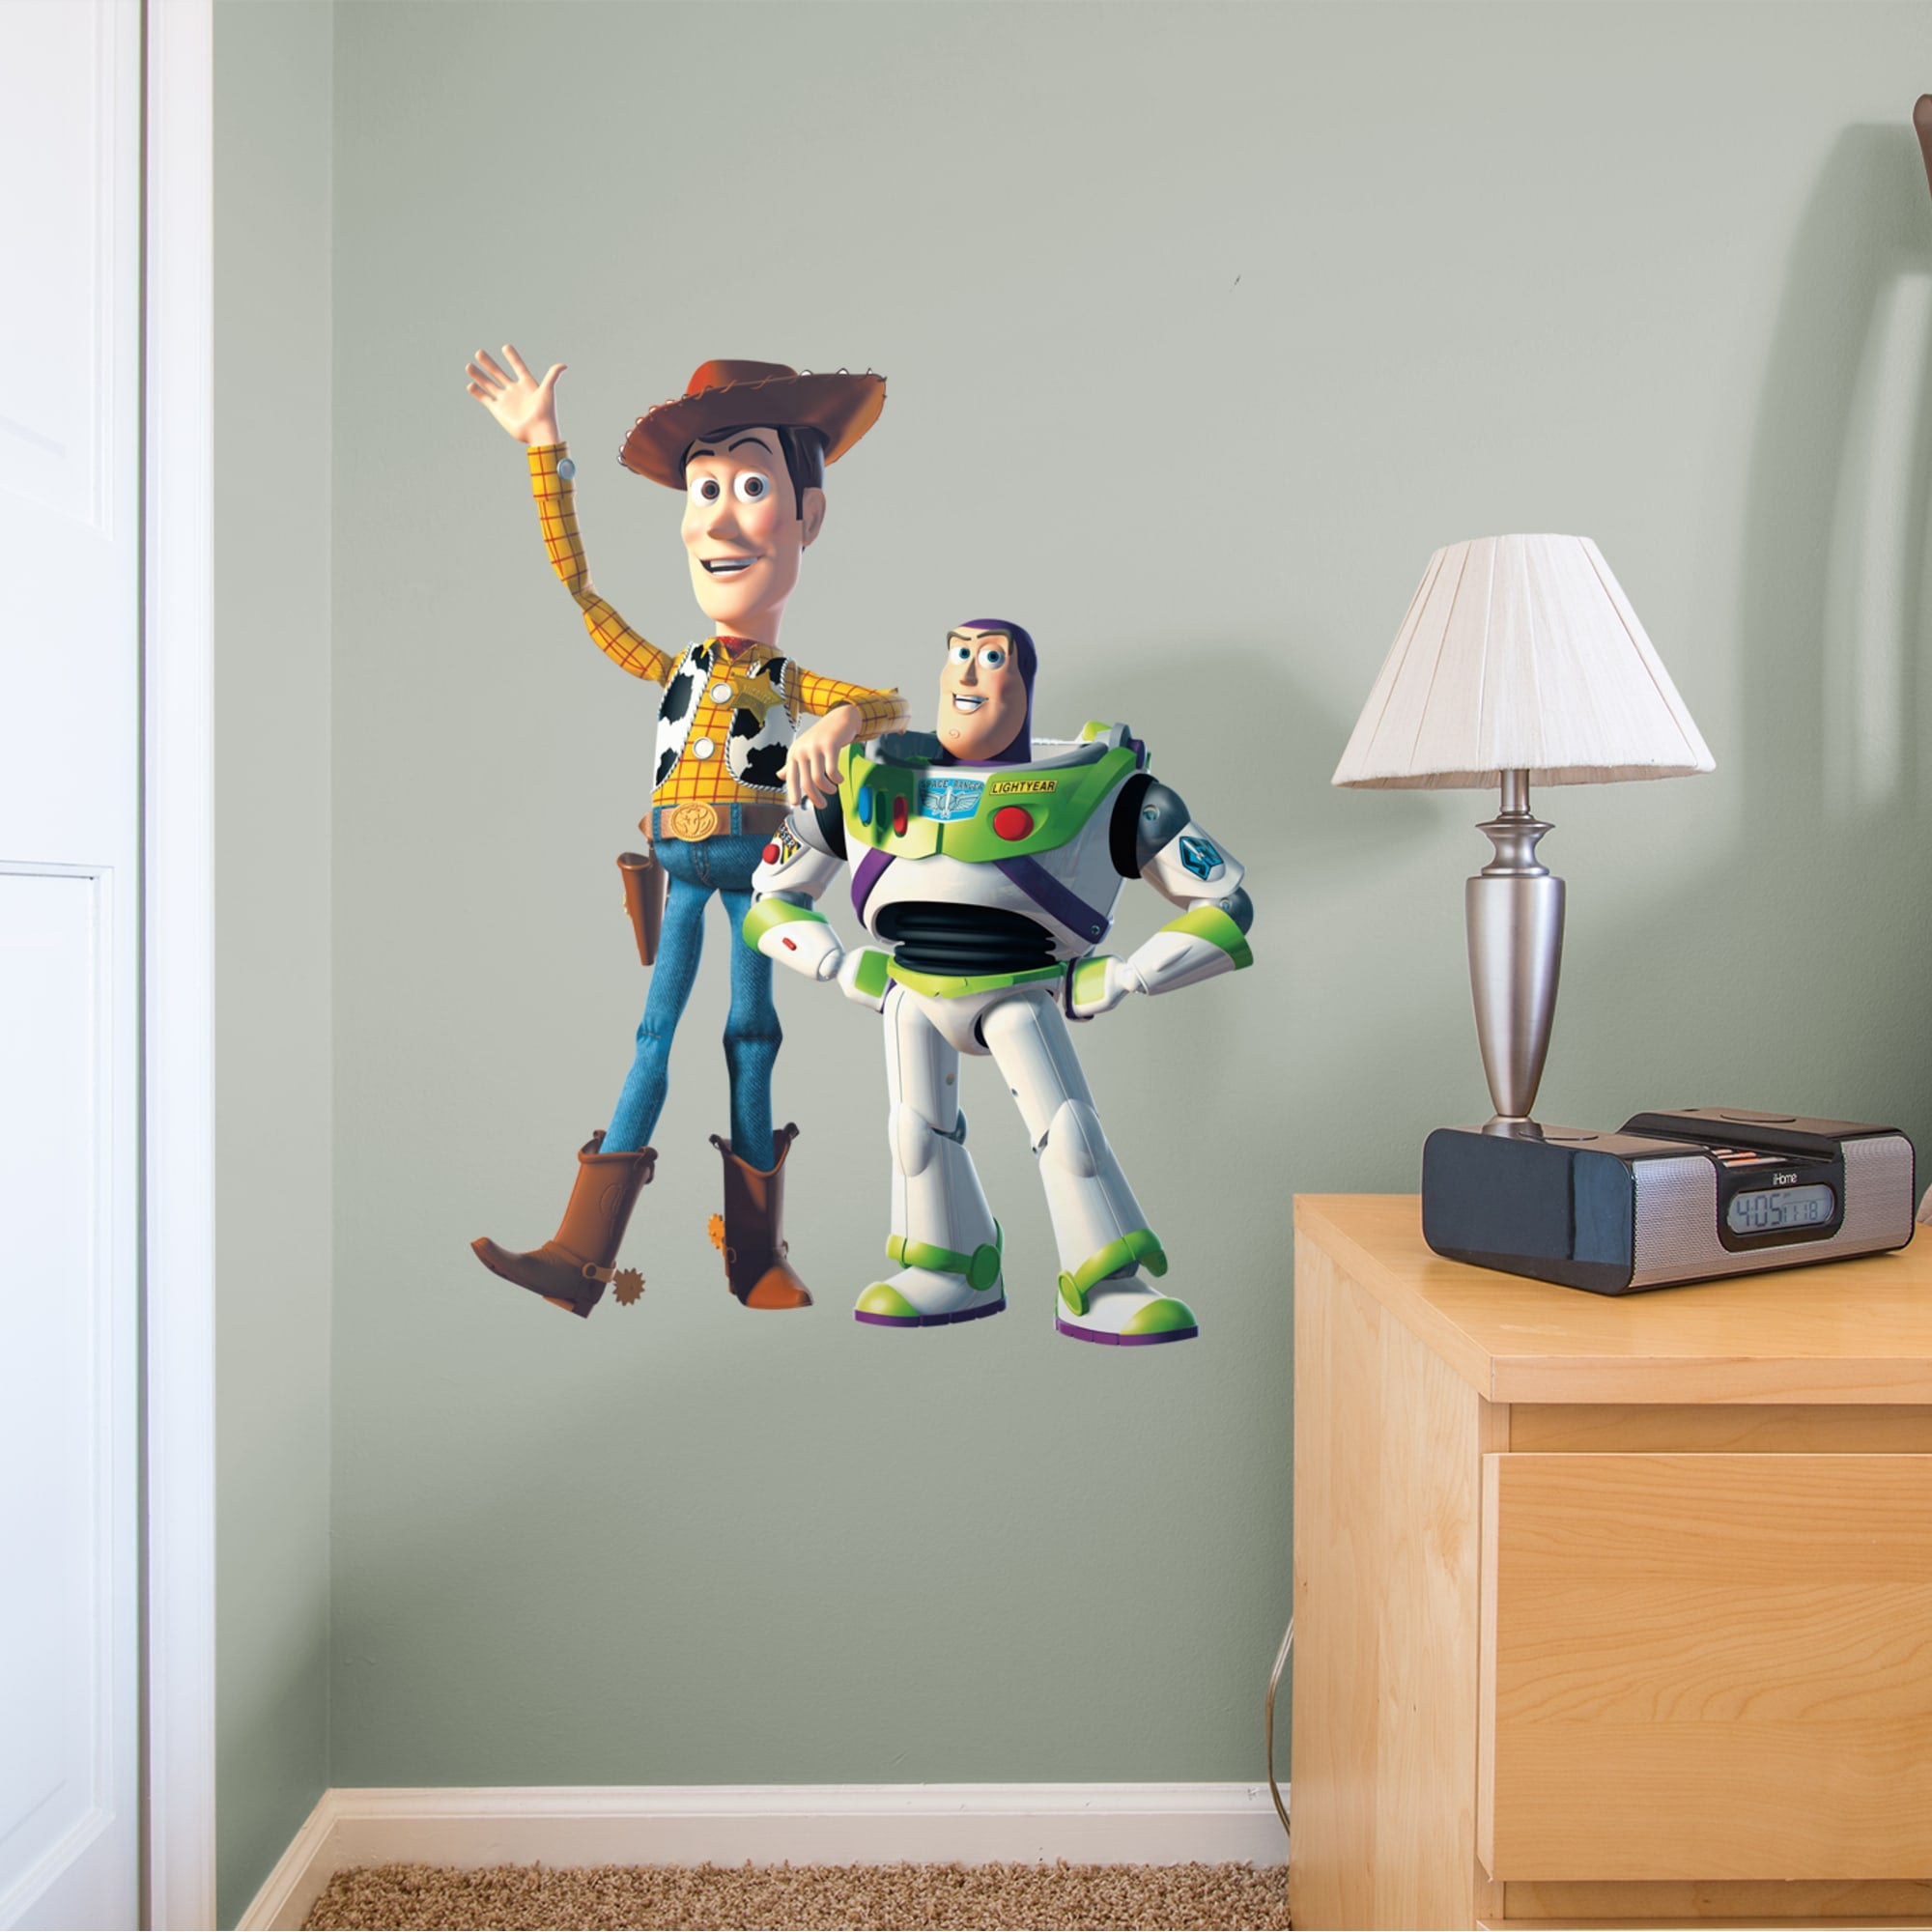 Woody & Buzz - Officially Licensed Disney Removable Wall Decal 24.0"W x 31.0"H by Fathead | Wood/Vinyl